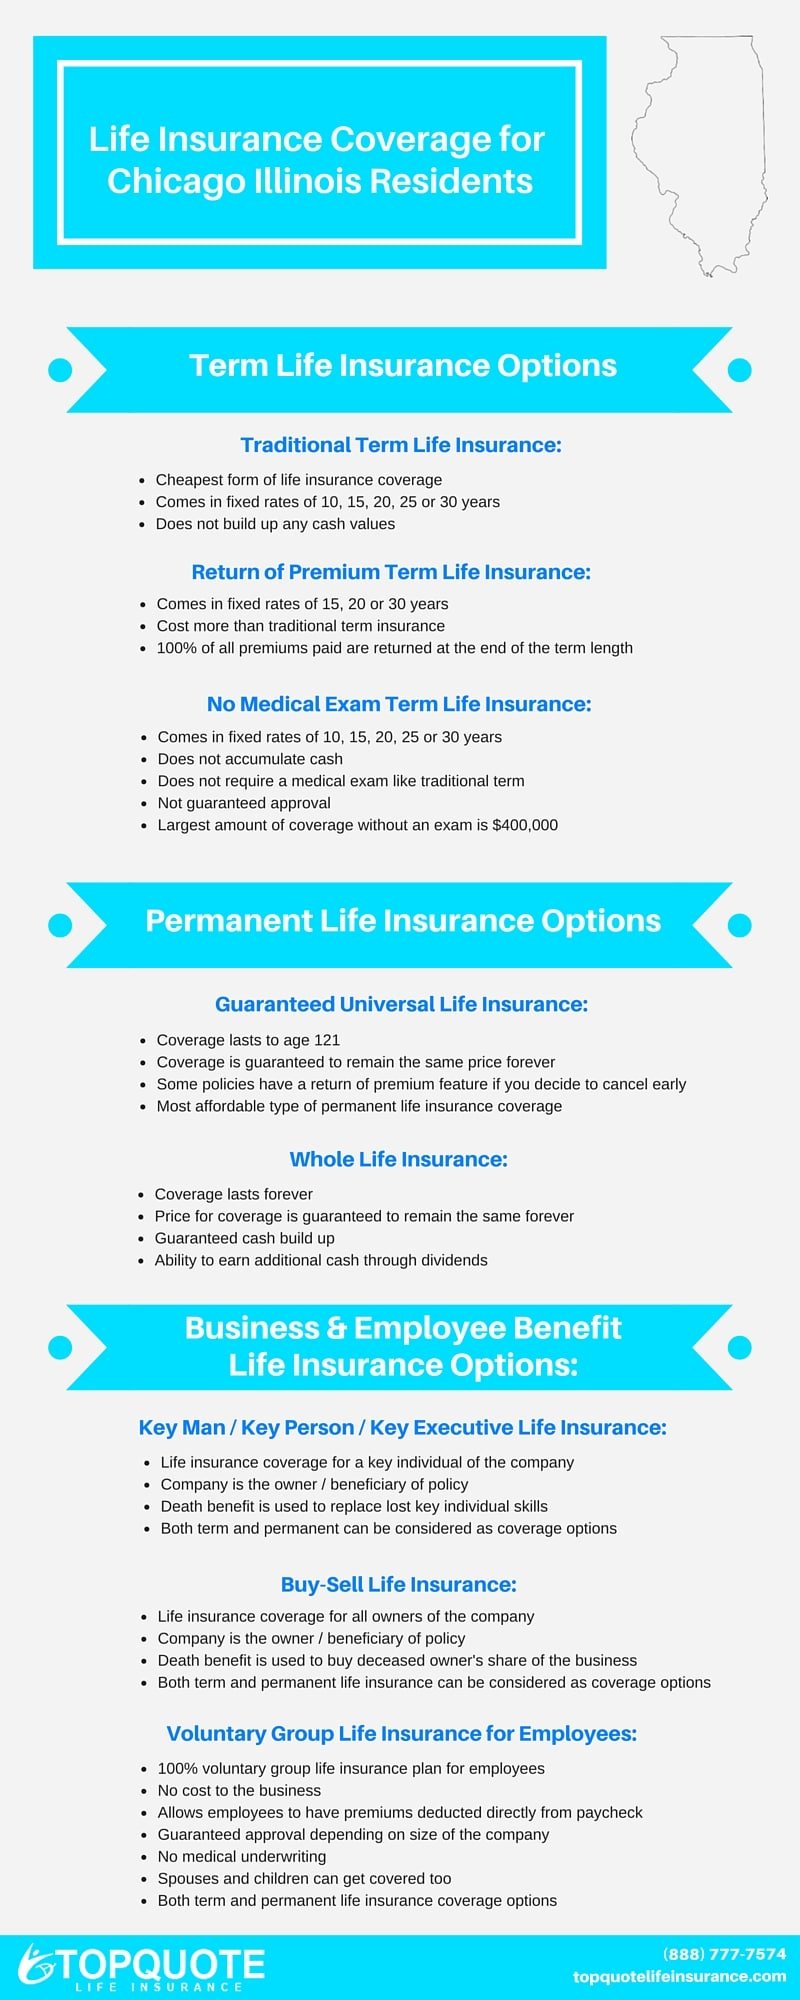 Life Insurance Quotes for Chicago, Illinois Residents Online